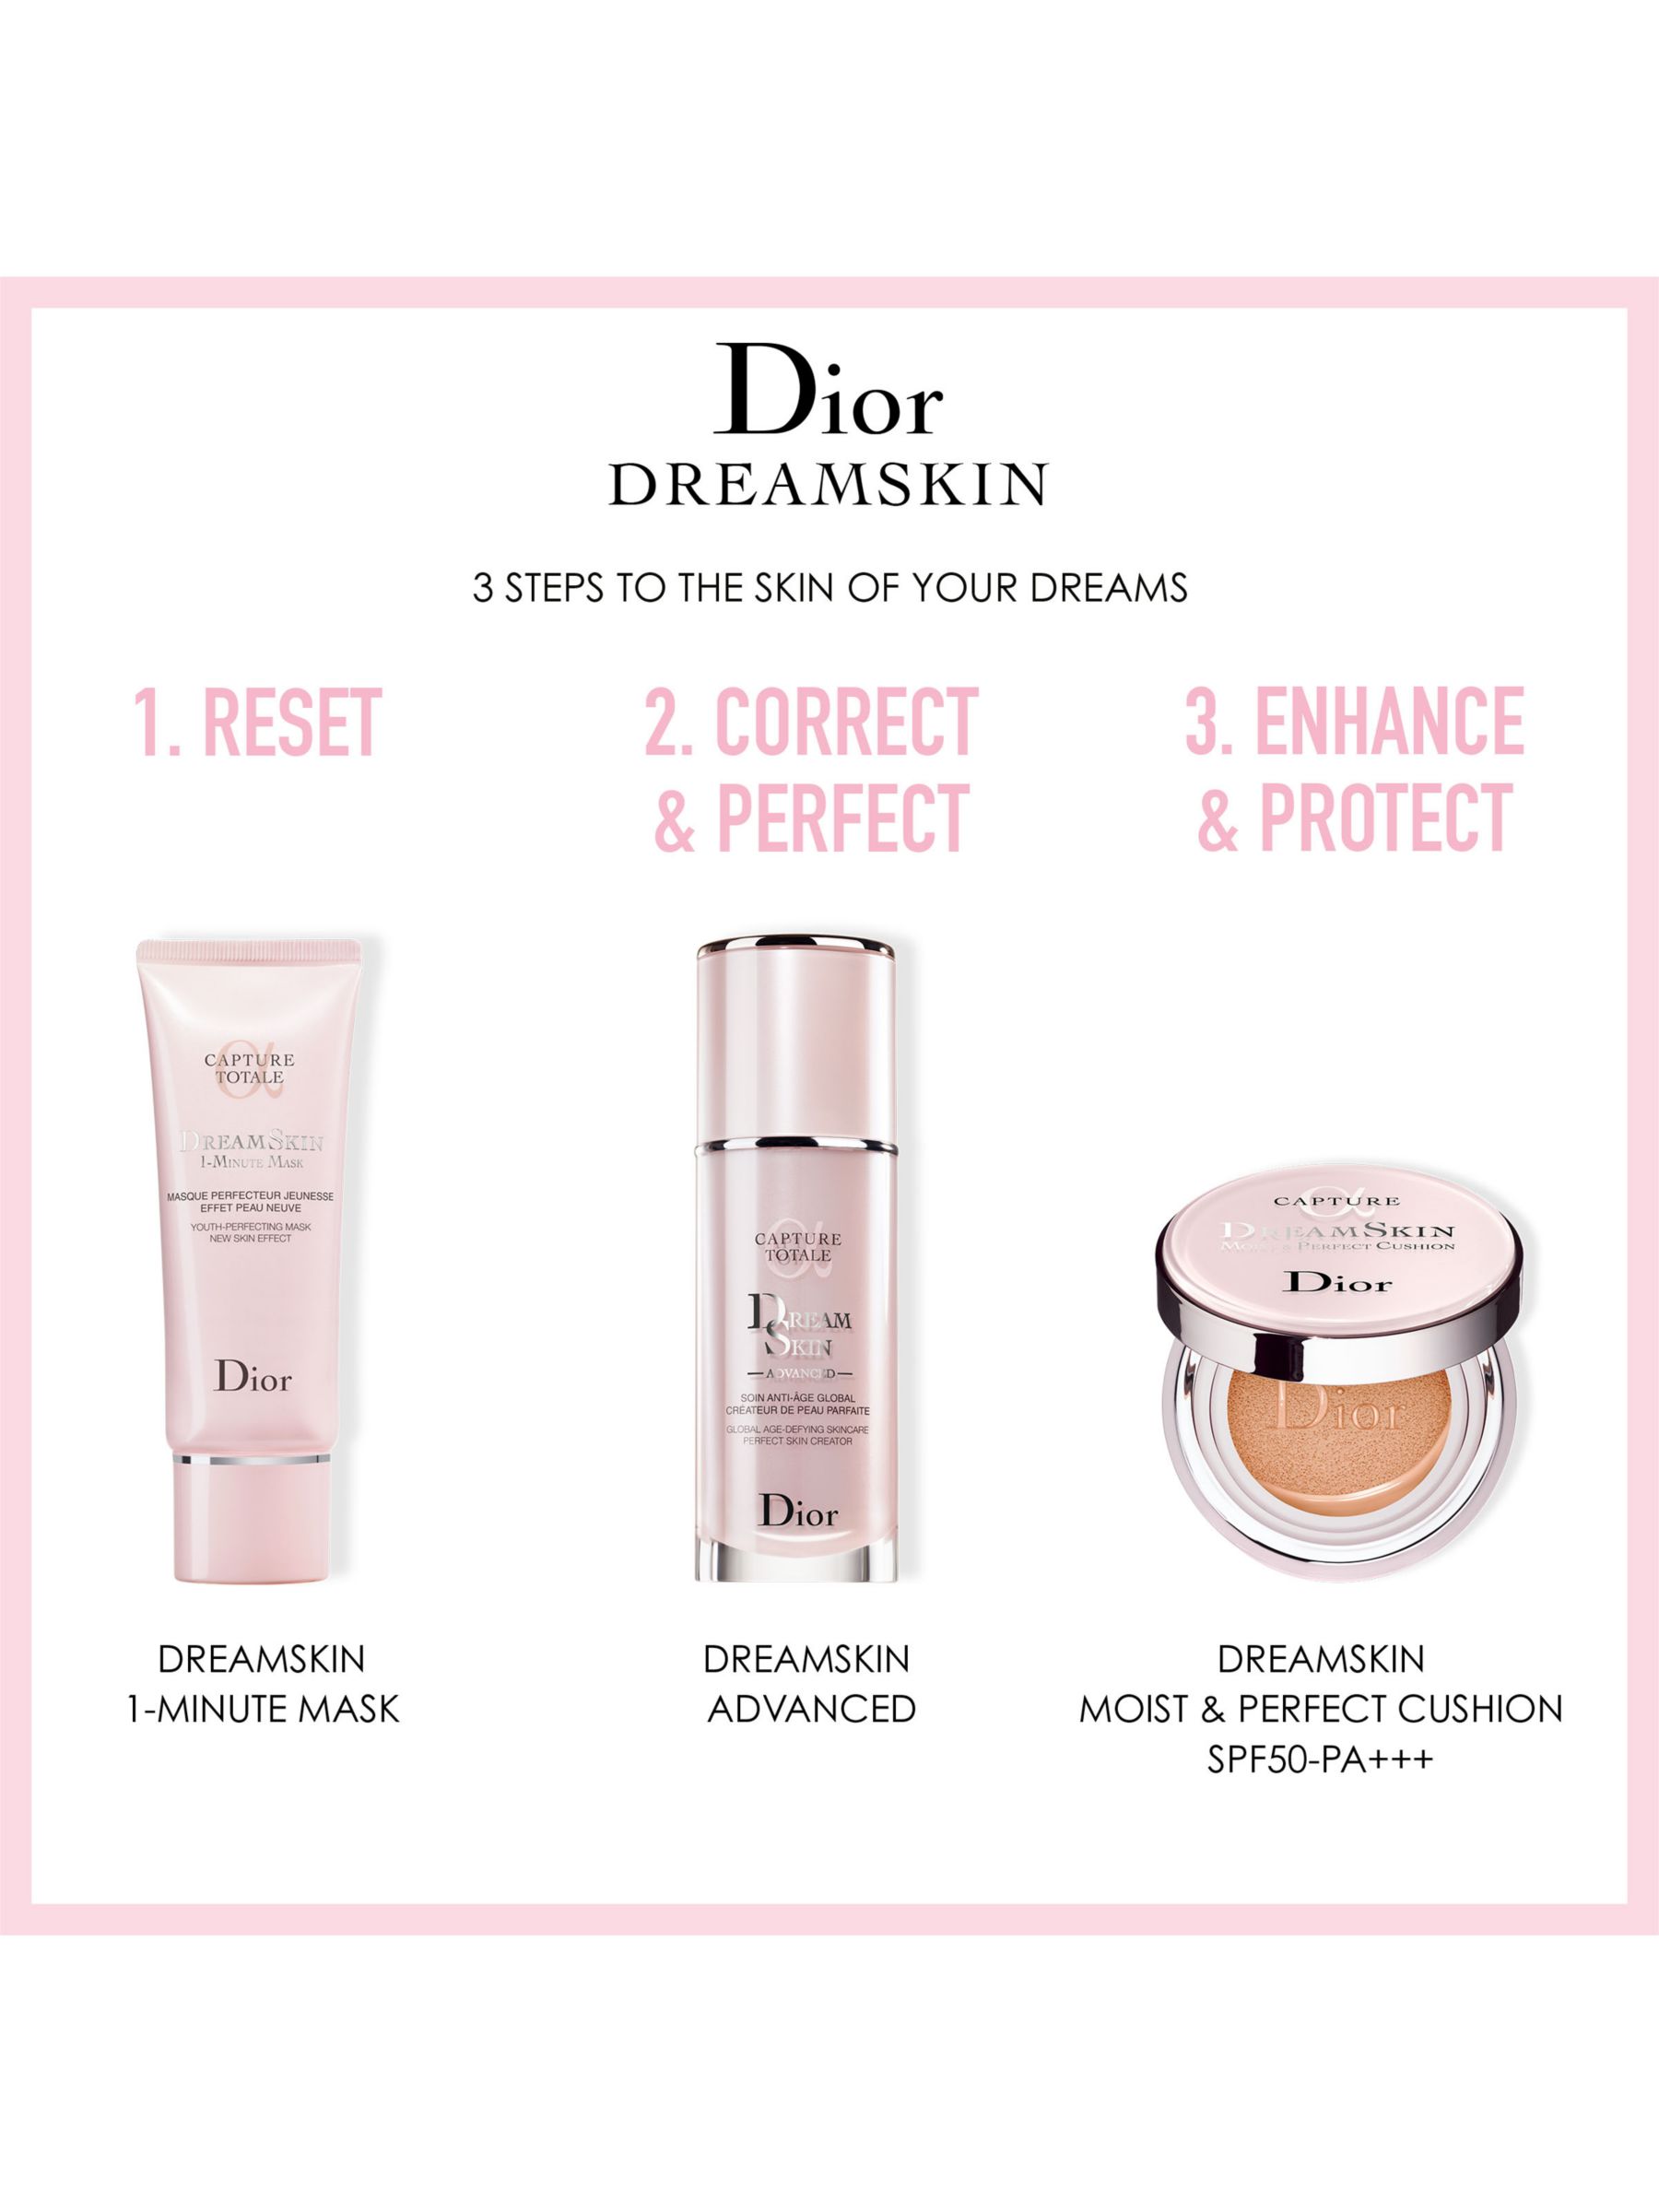 capture totale dream skin dior review